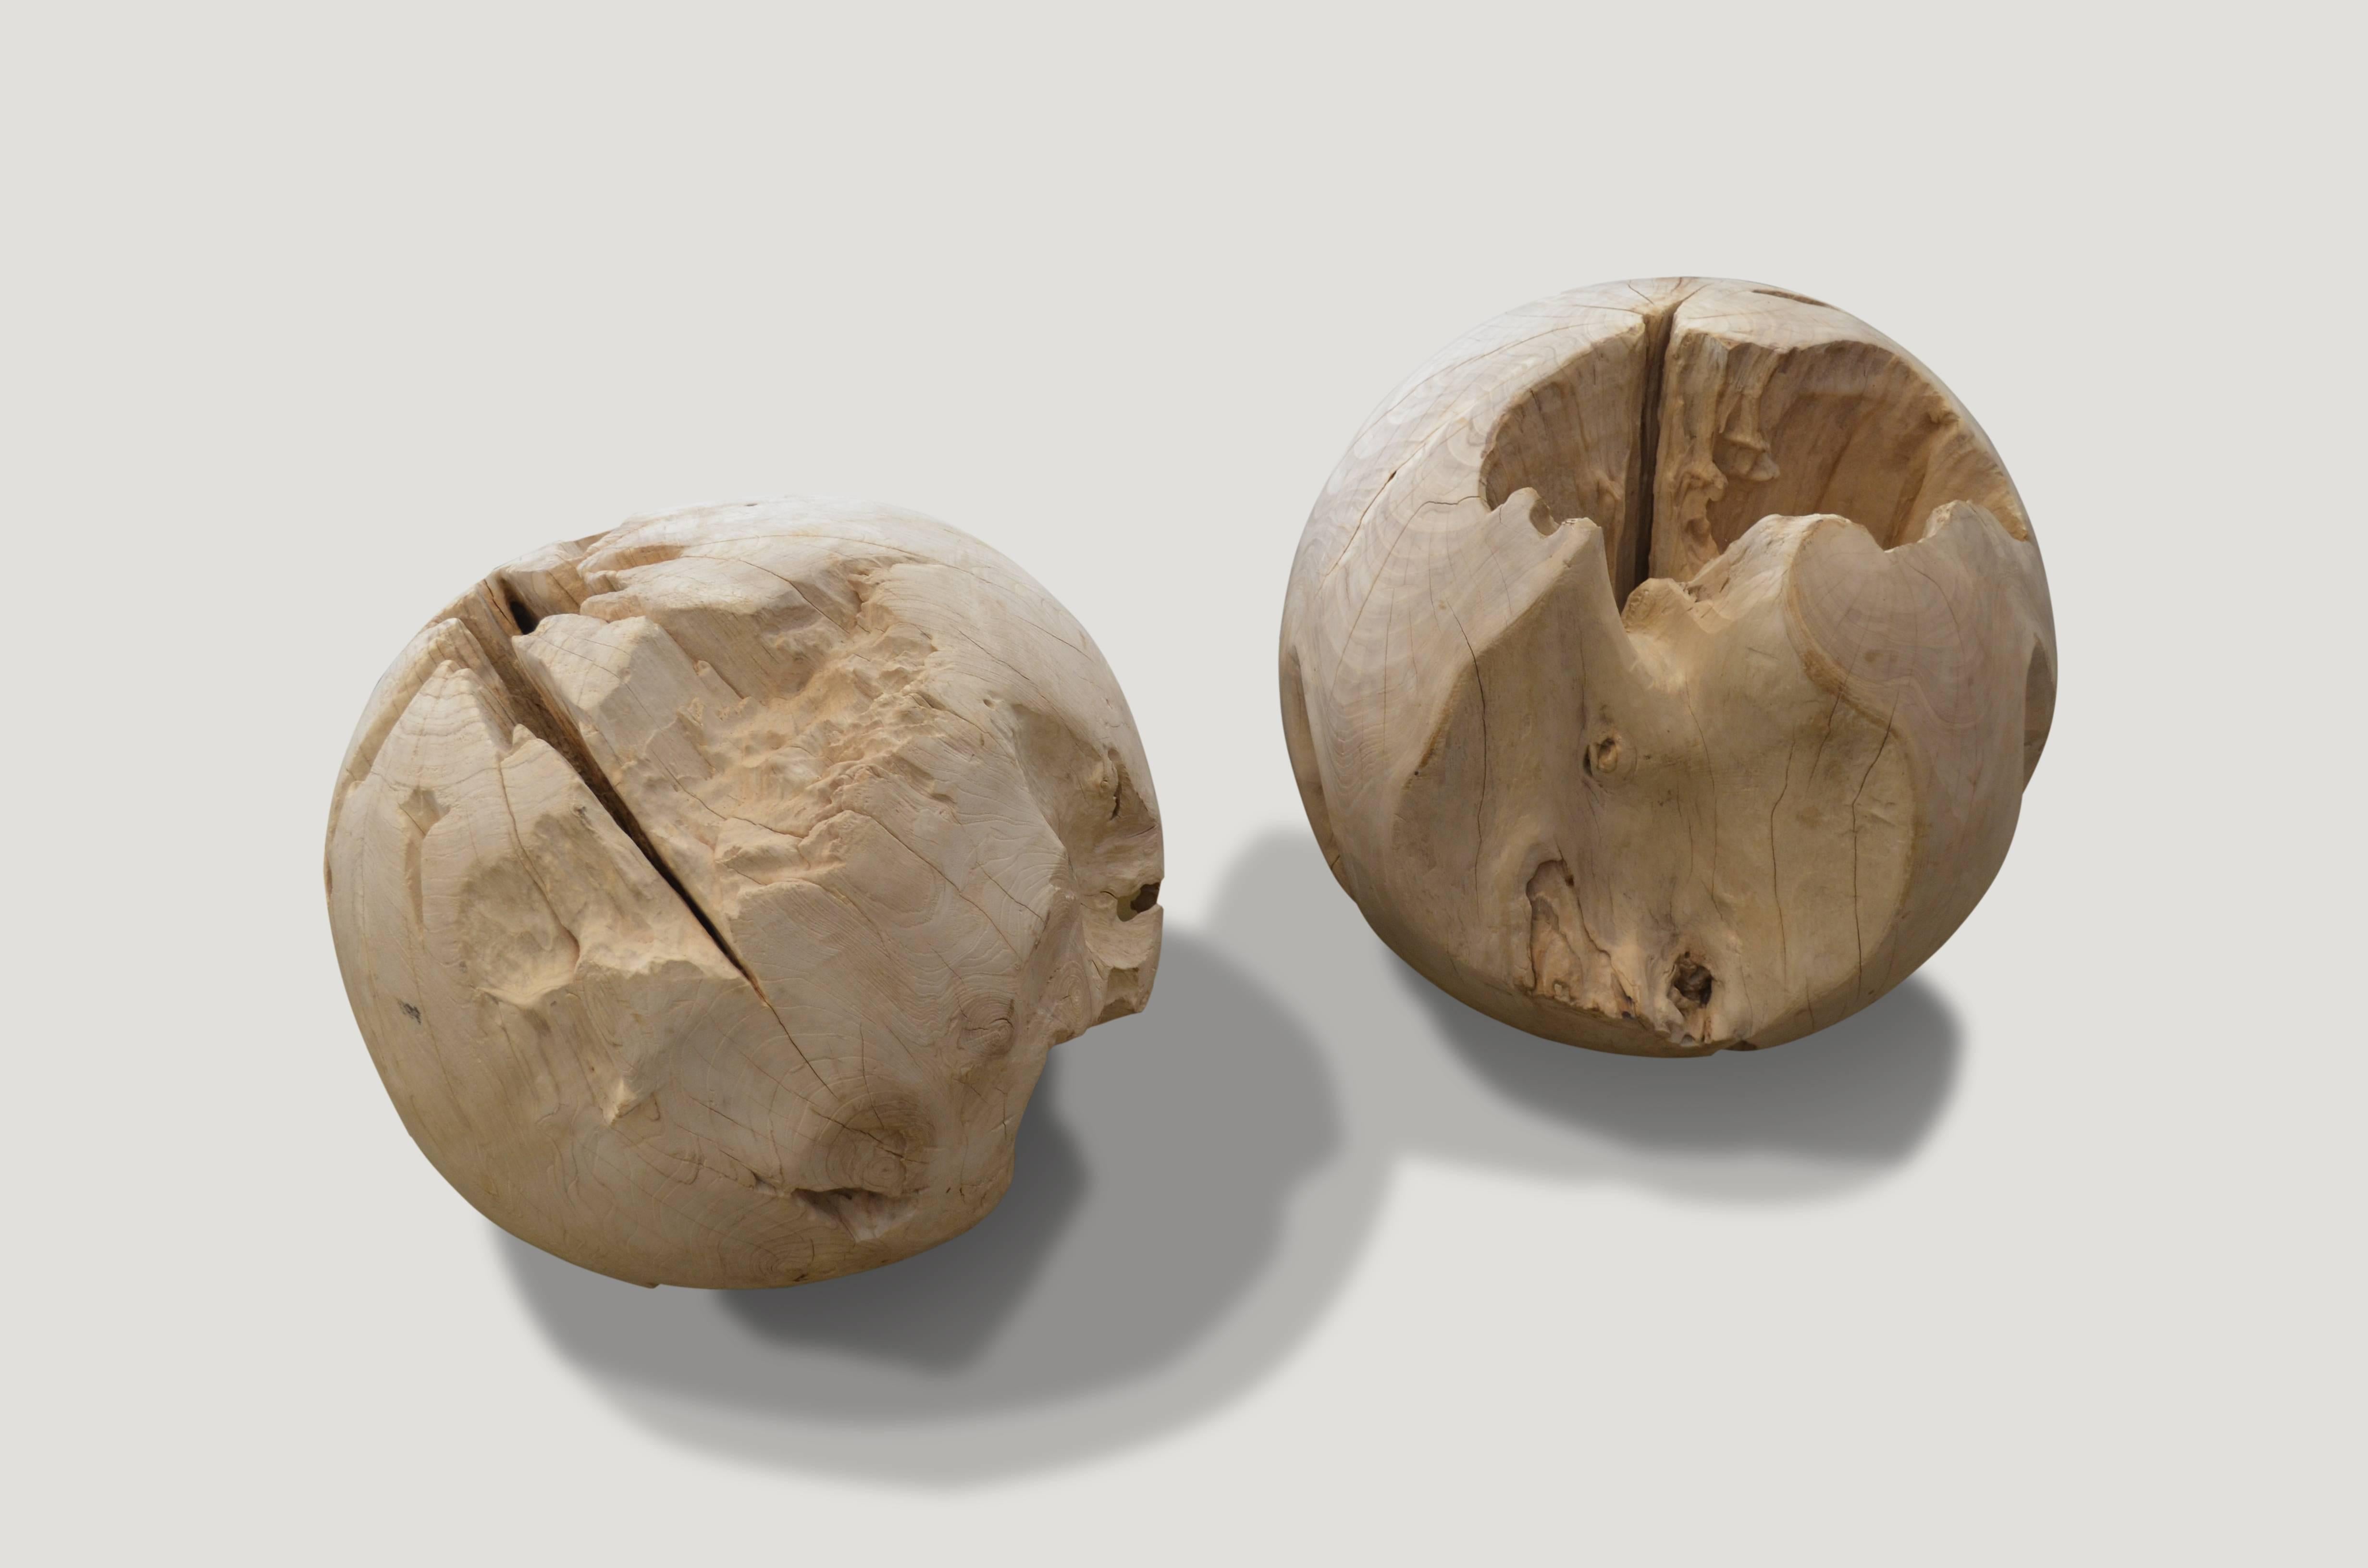 Beautiful organic teak wood root, bleached and shaped into a sphere.

Andrianna Shamaris, Inc. The Leader In Modern Organic Design™
